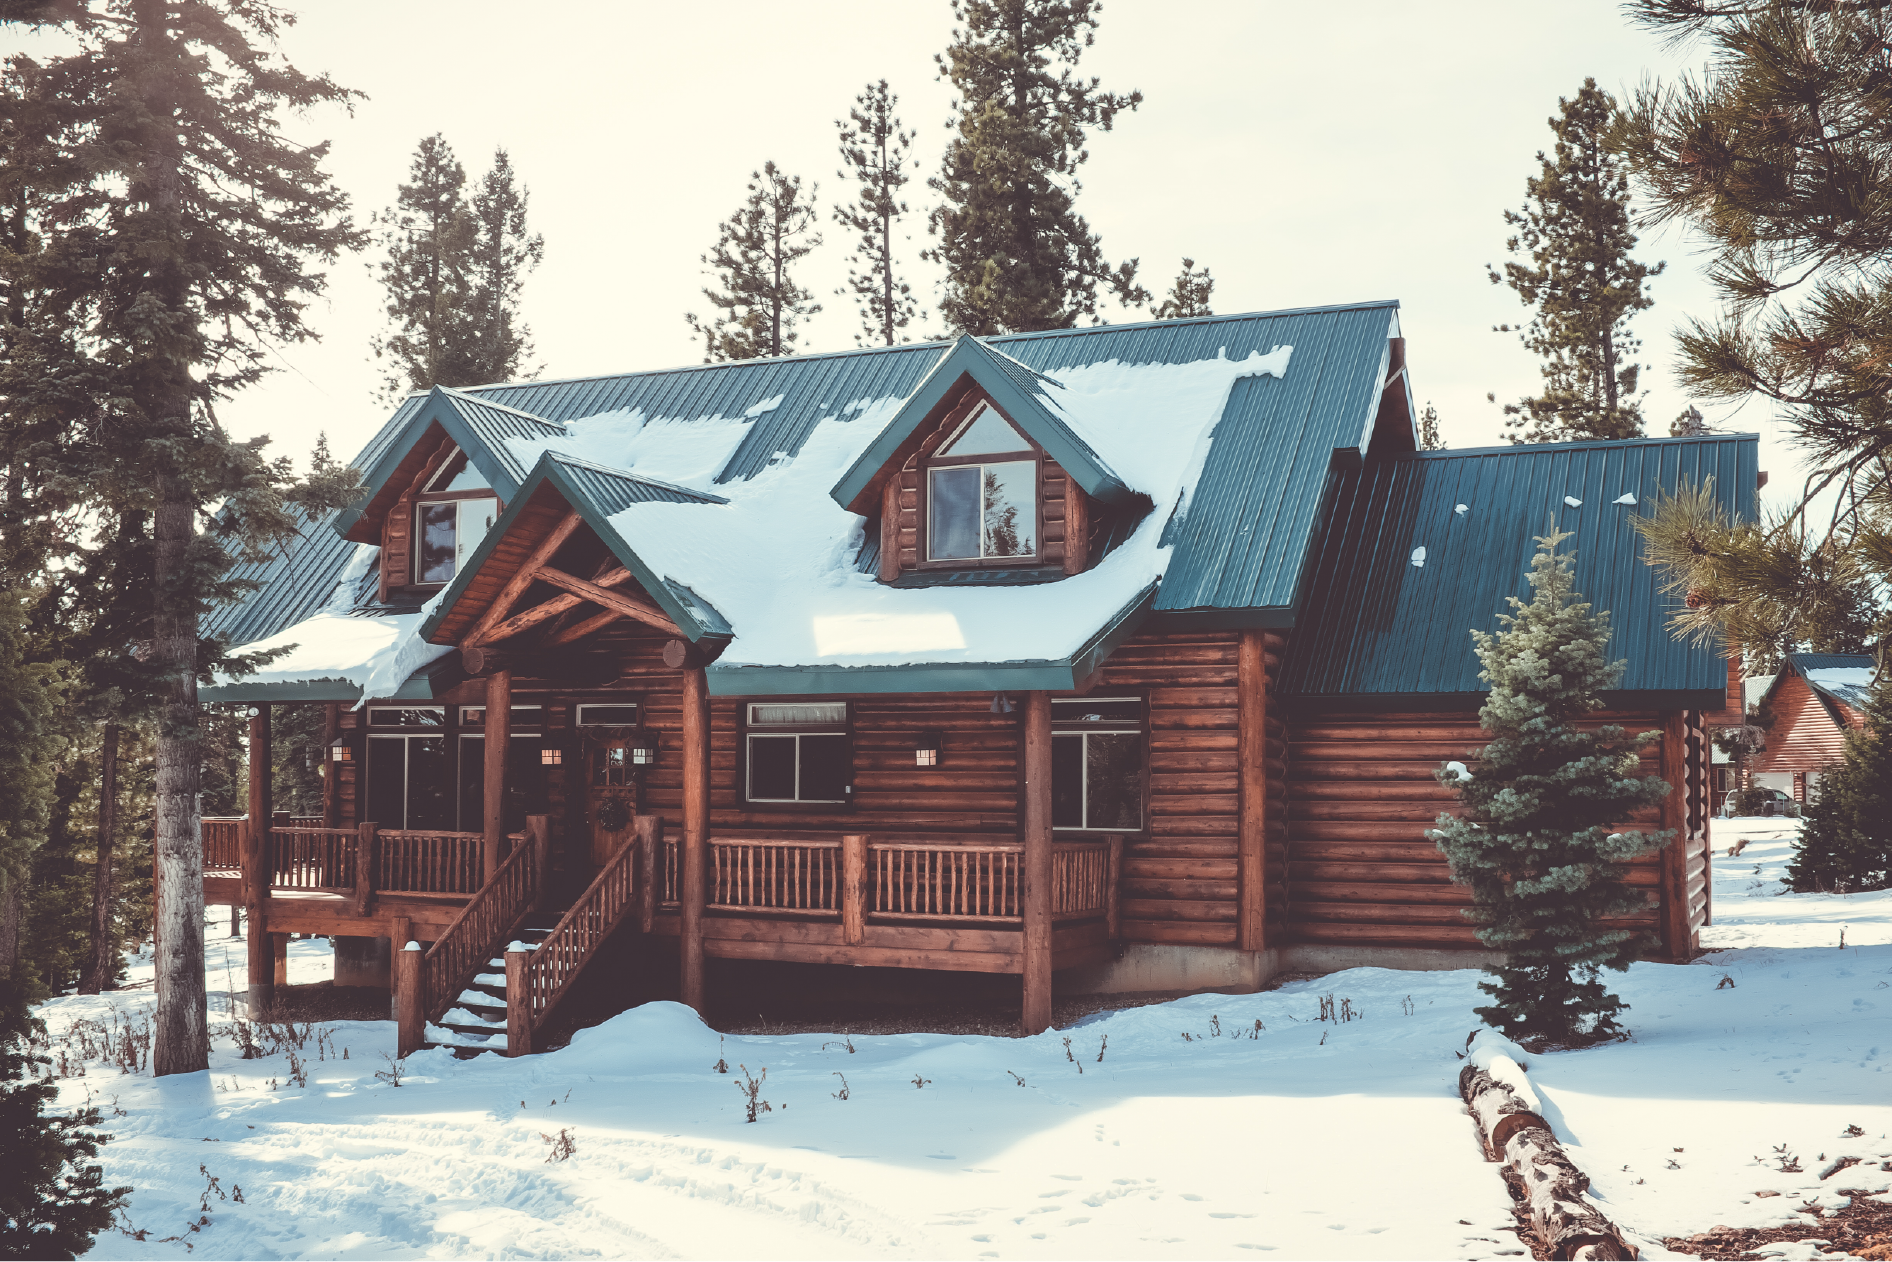 Log Cabin Home in Snow with Large Pines